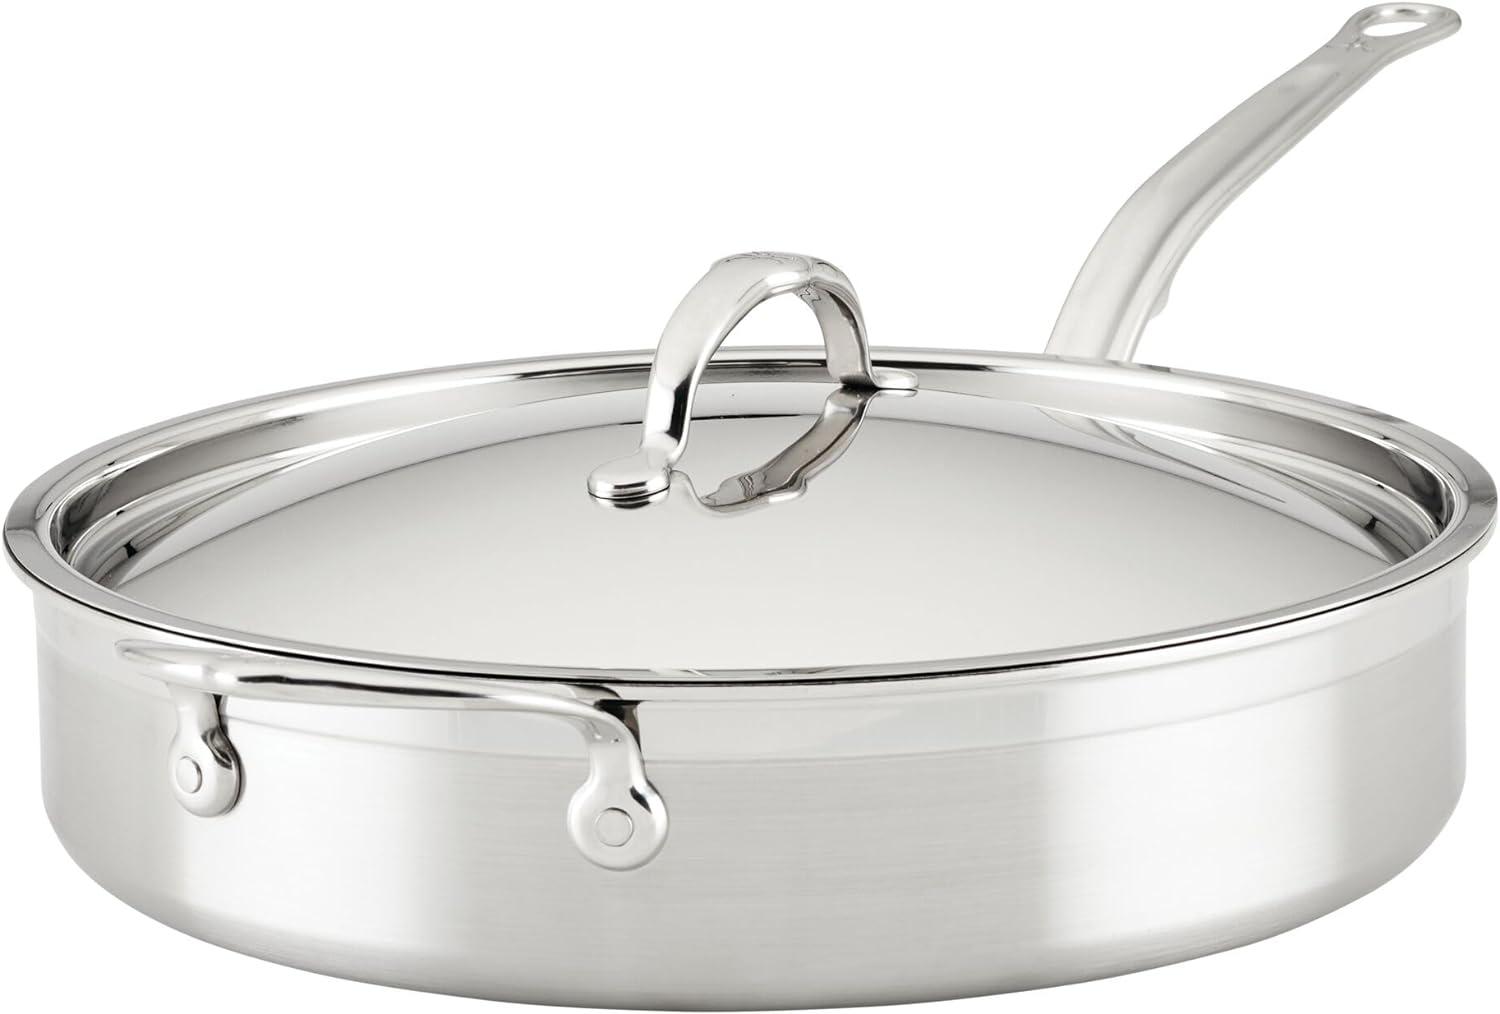 Hestan ProBond Professional Clad Stainless Steel Saute Pan for $80.02 Shipped